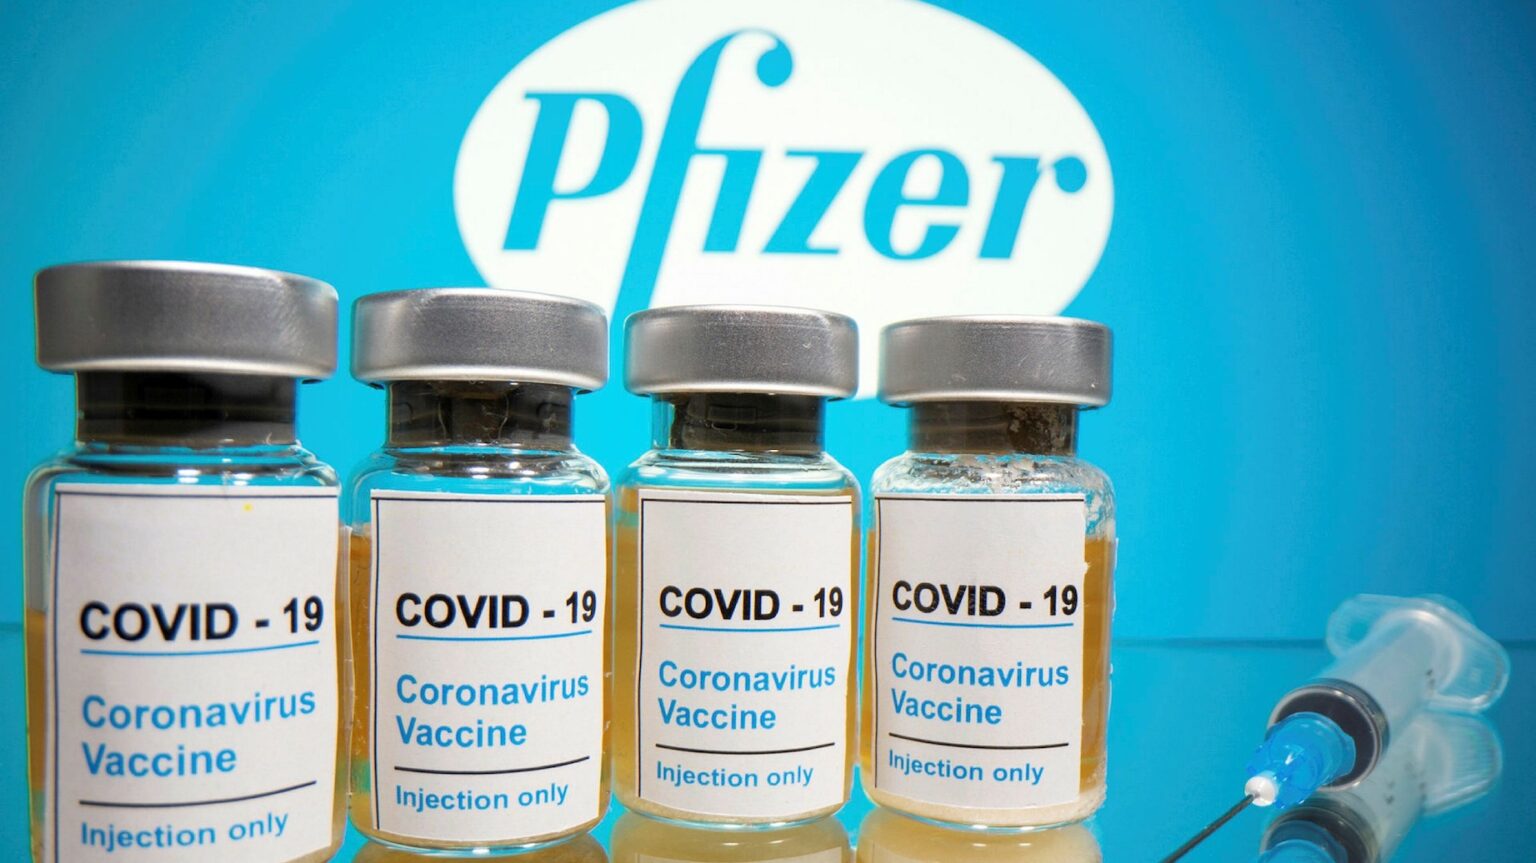 The end of the coronavirus may be in sight. Could this 90% effective vaccine be the cure we've been waiting for?